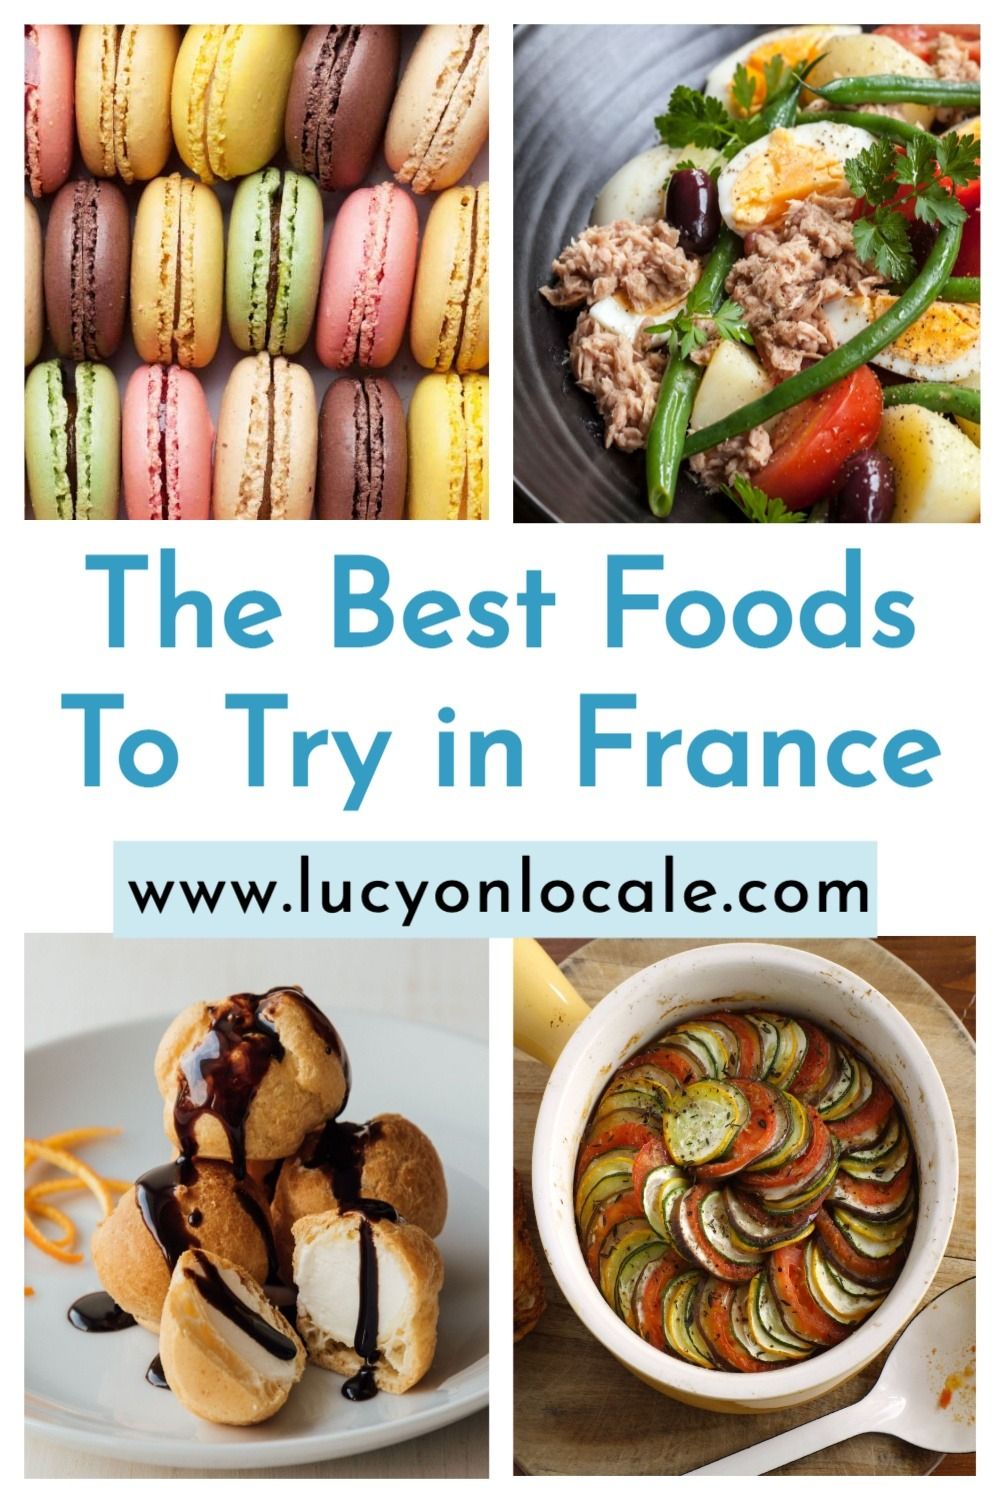 The best foods to try in France